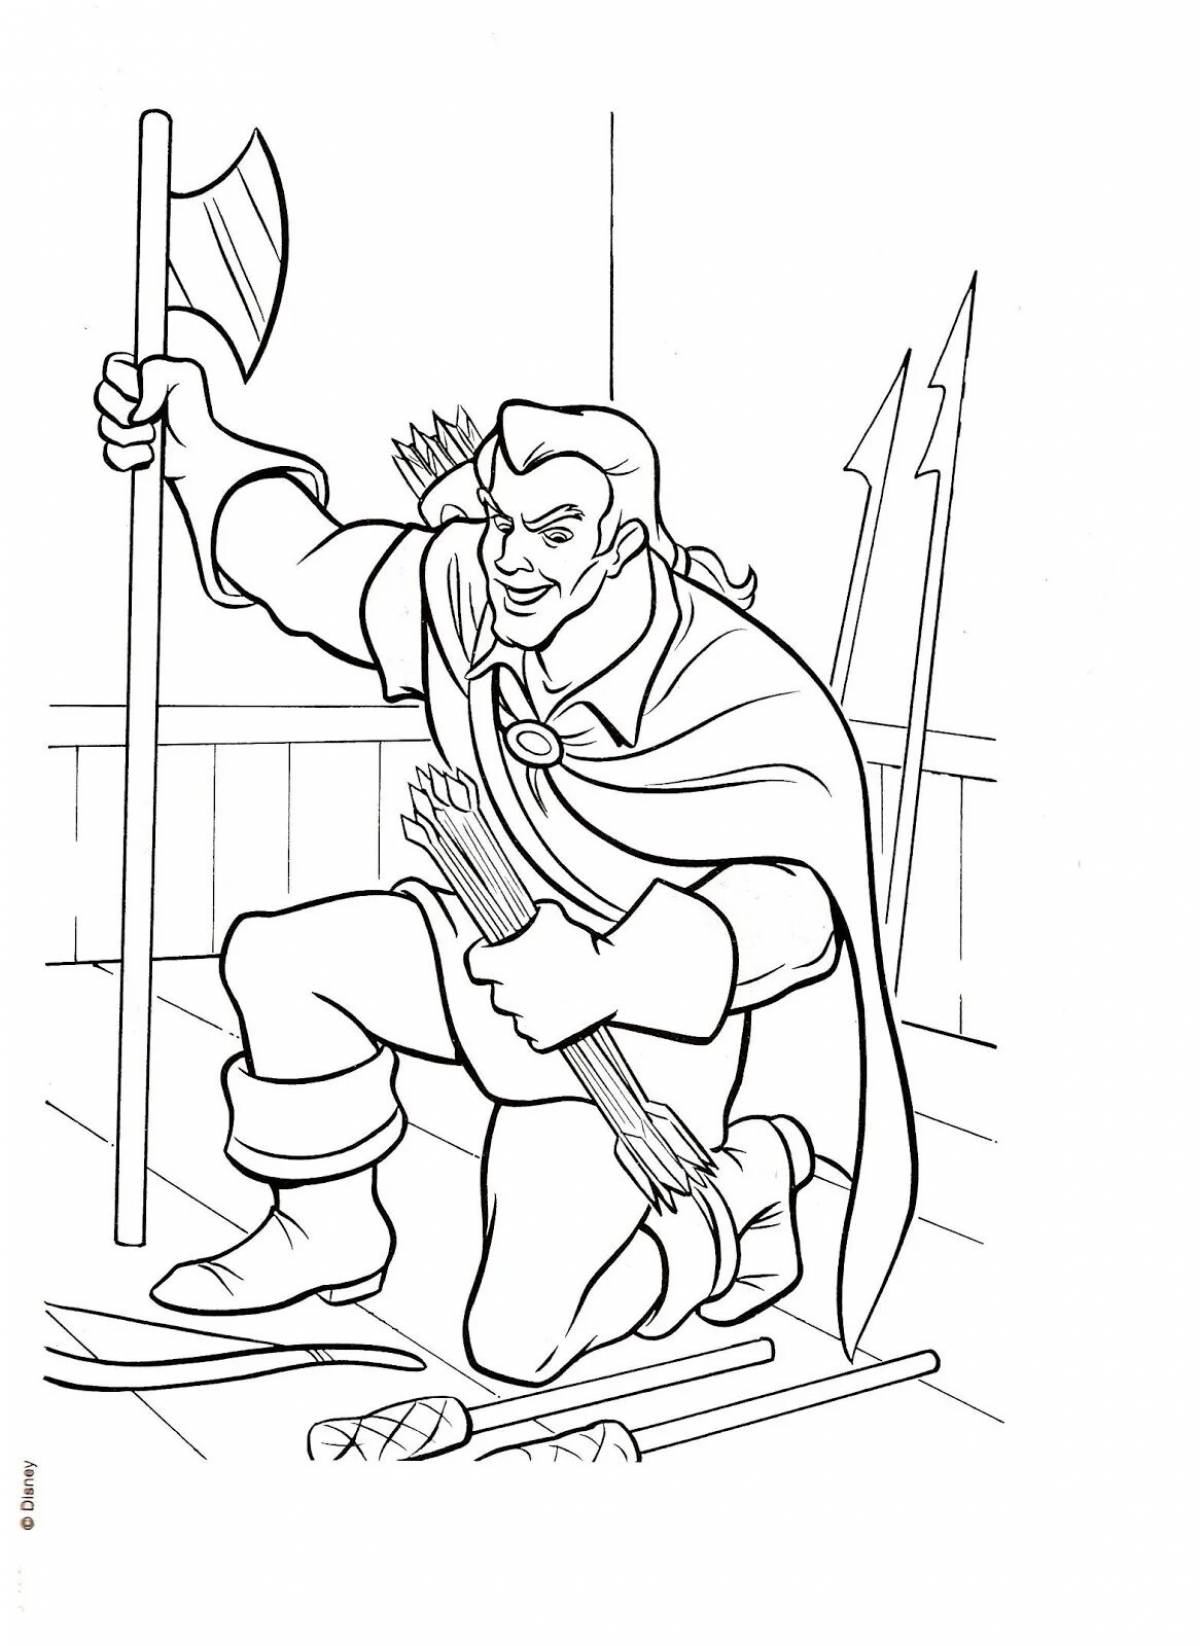 Gaston welcome coloring page